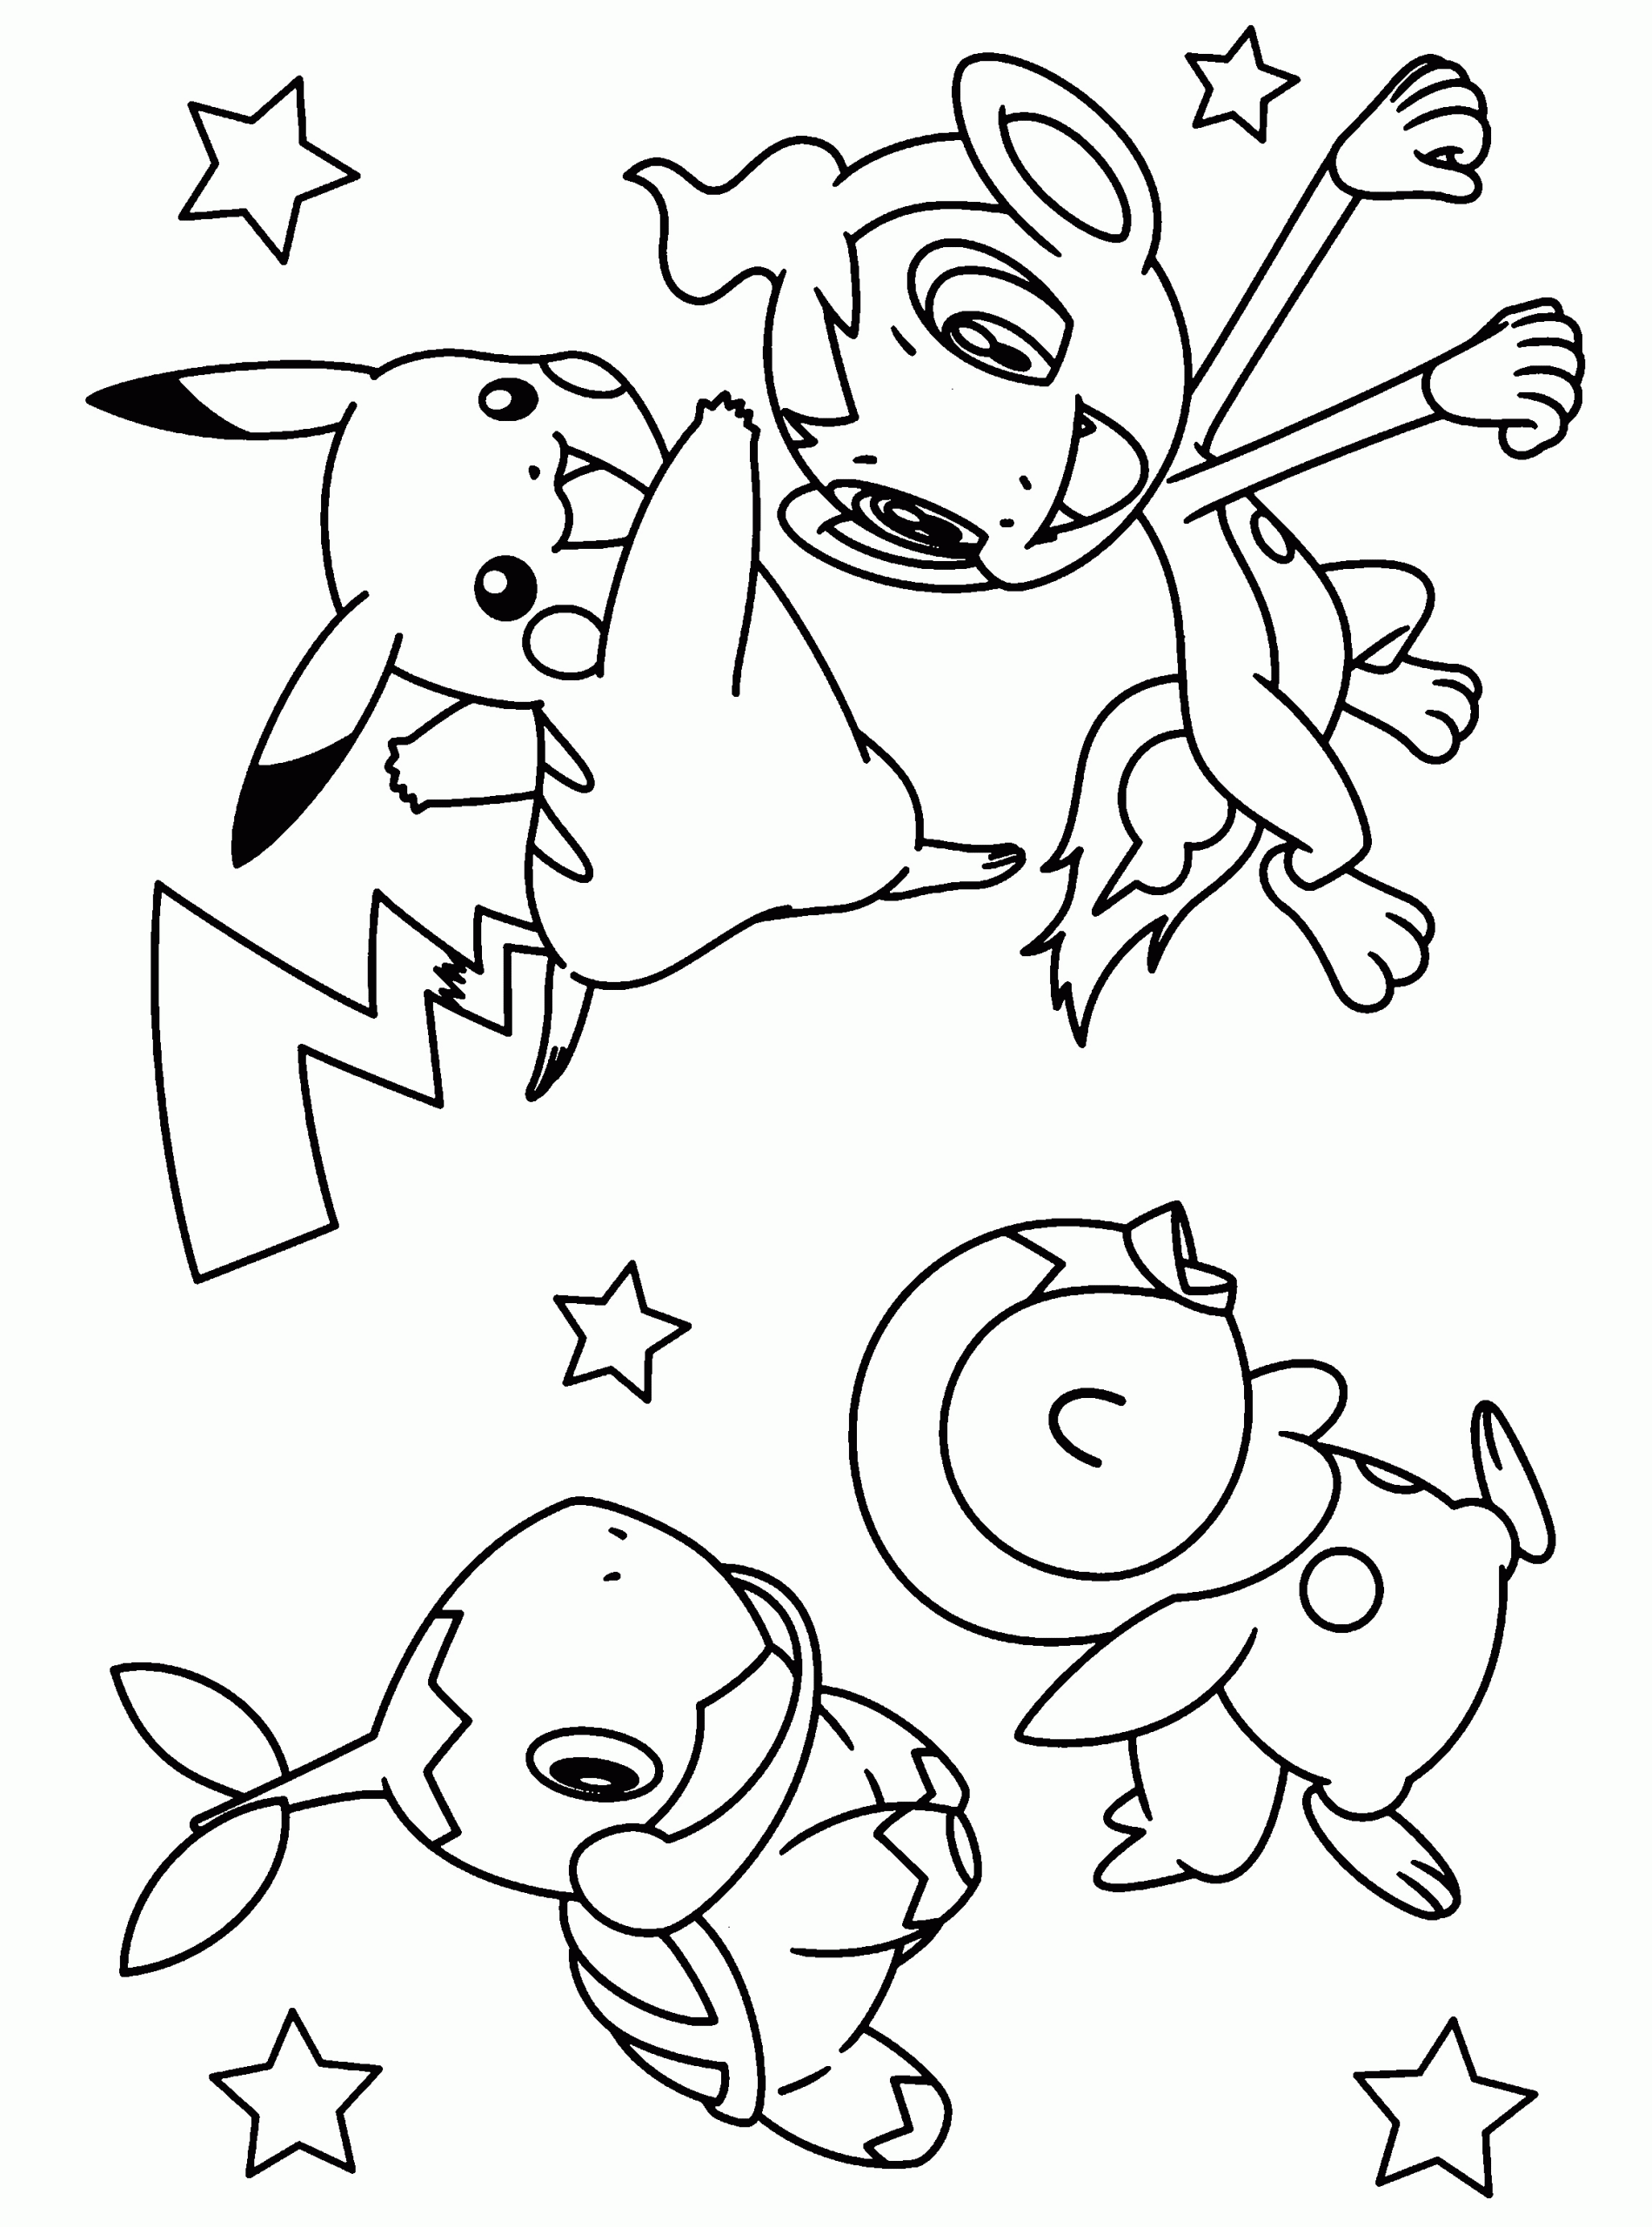 Pokemon Coloring Pages For Kids
 55 Pokemon Coloring Pages For Kids